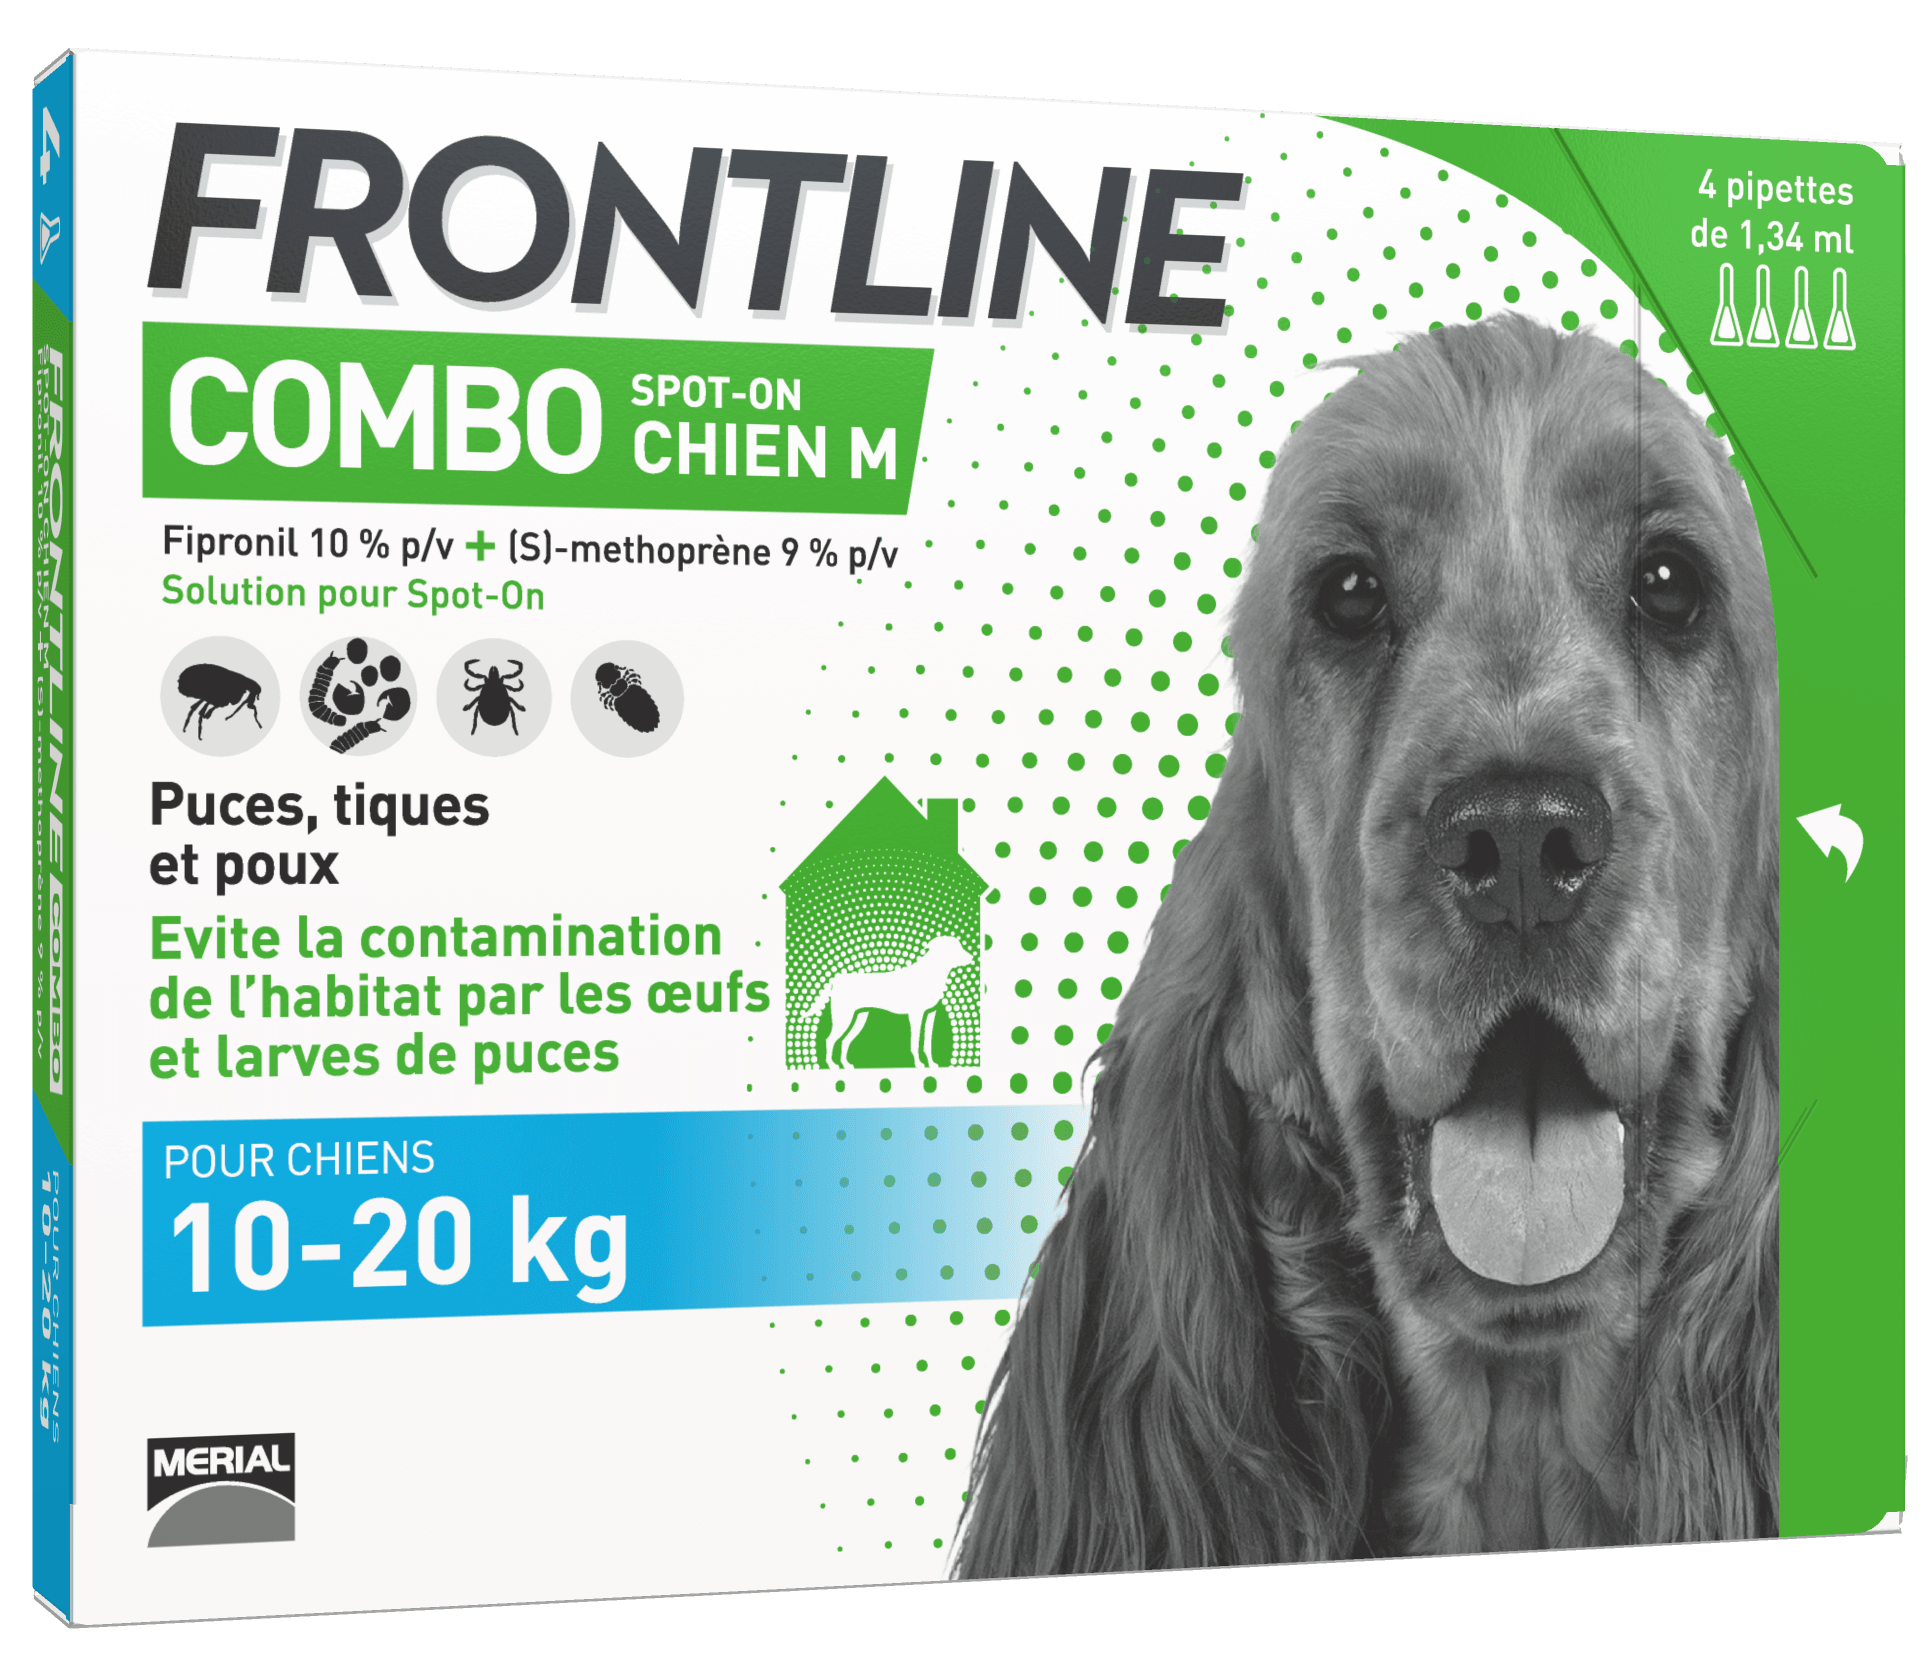 Pipettes FRONTLINE Combo Chien